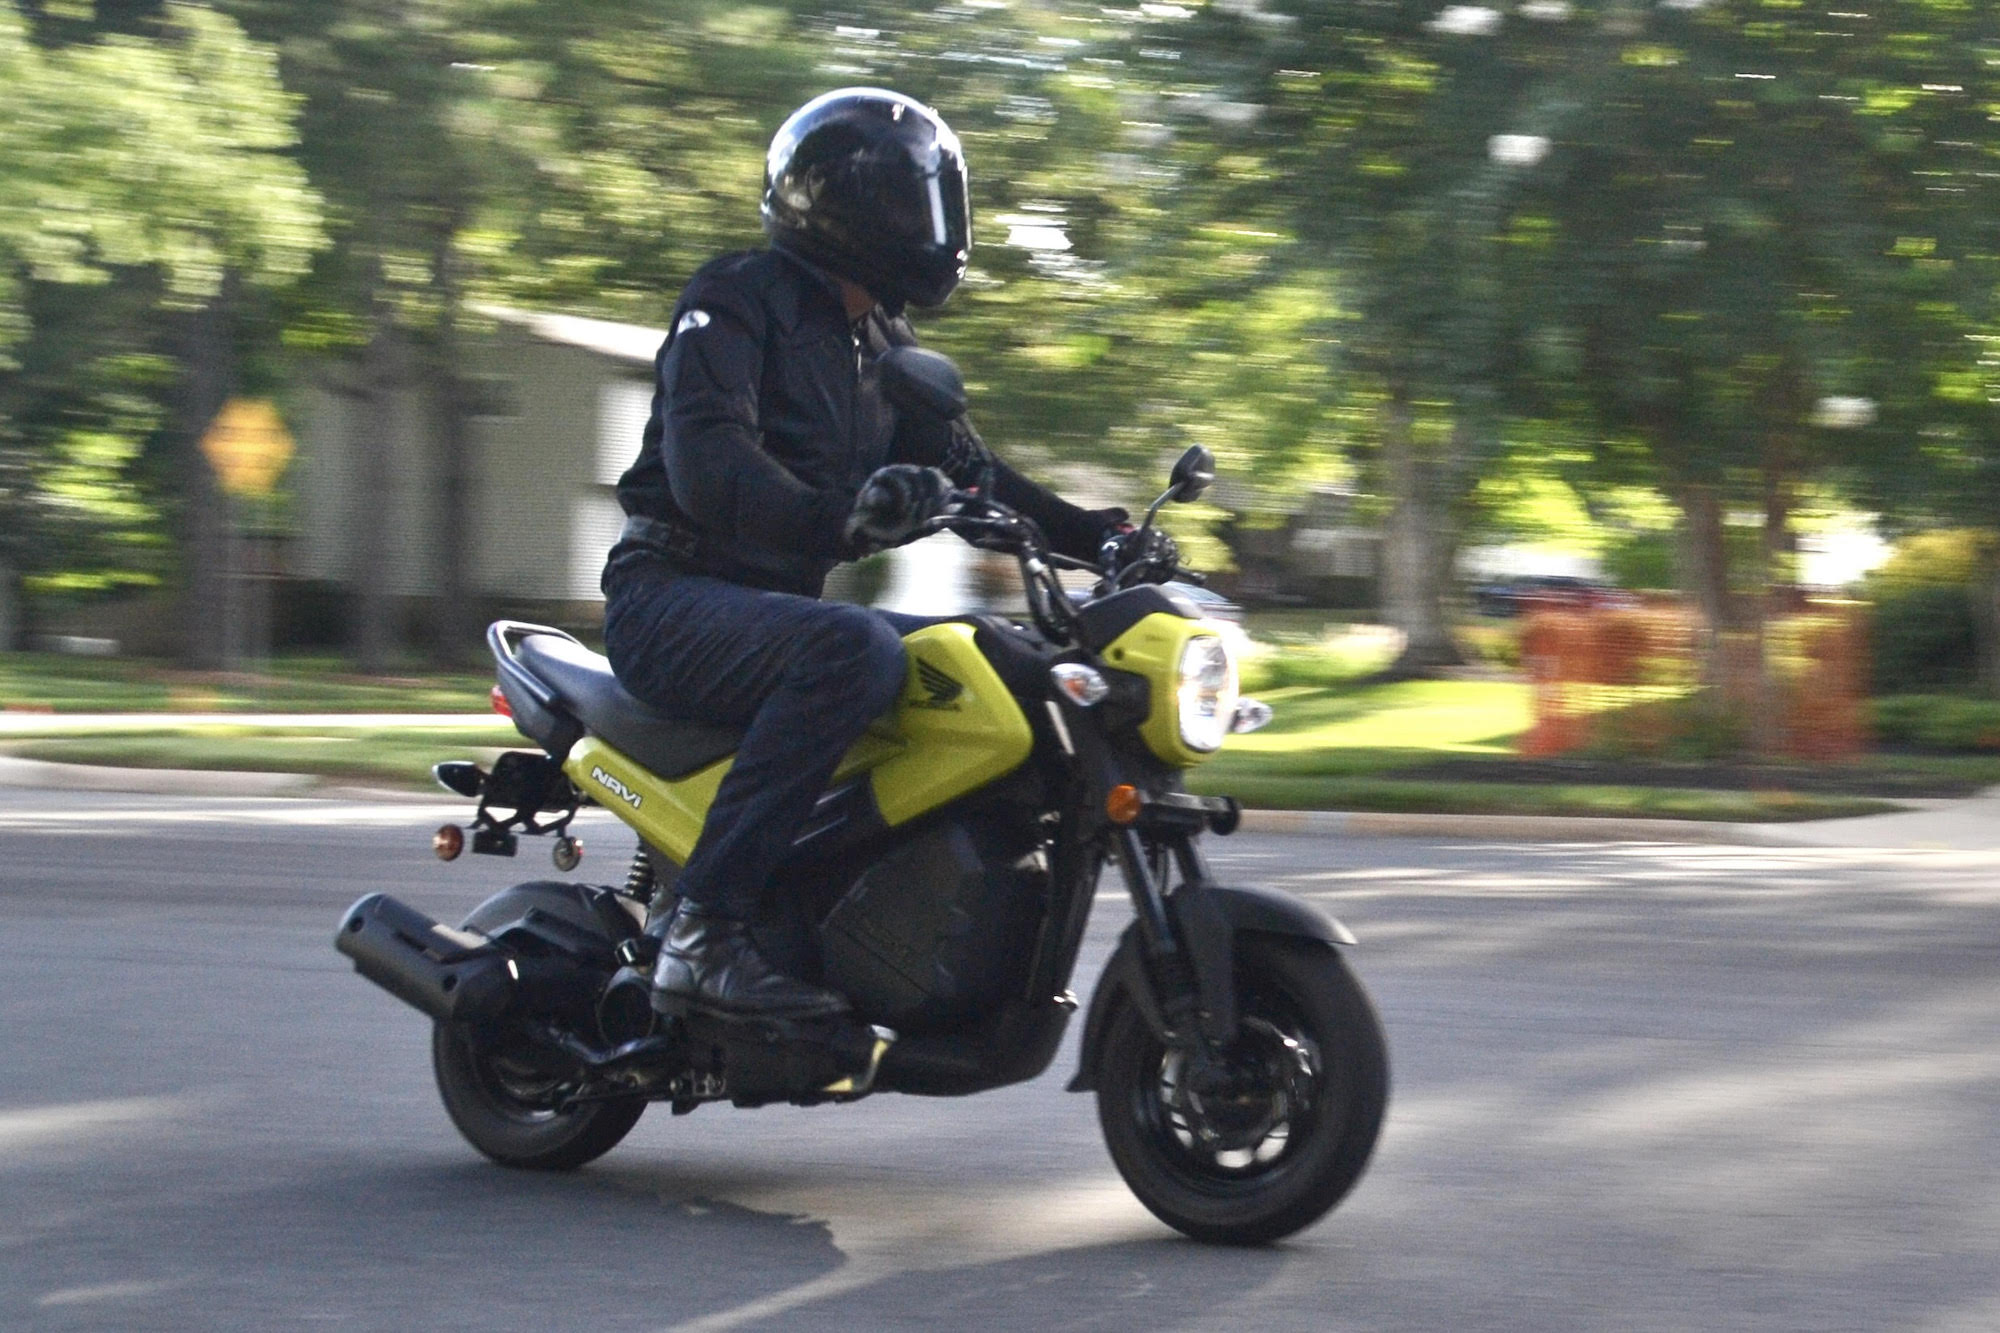 At $1,807, the Honda Navi is the perfect starter motorcycle for a beginner